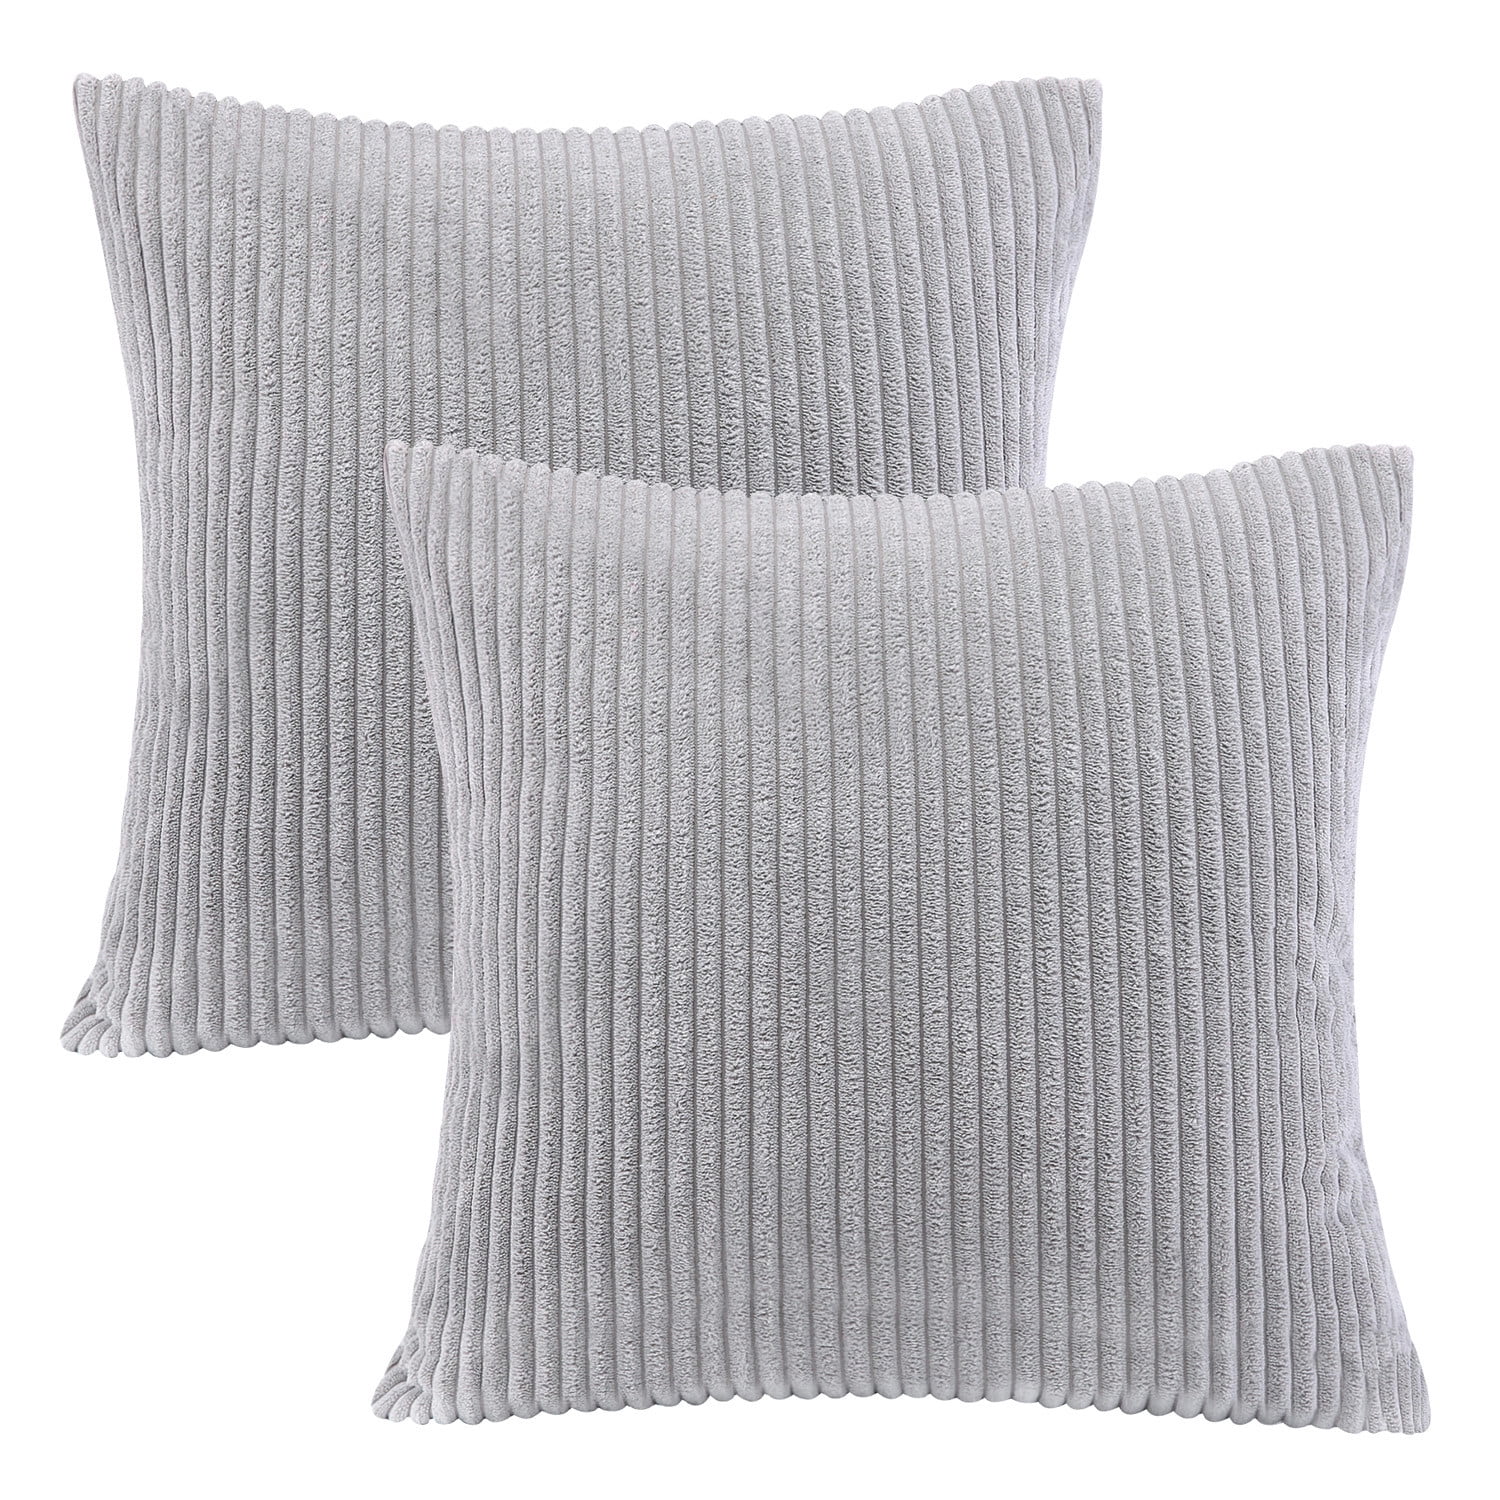 CaliTime Pack of 2 Comfy Throw Pillow Covers Cases for Couch Sofa Bed  Decoration Comfortable Supersoft Corduroy Corn Striped Both Sides 18 X 18  Inches